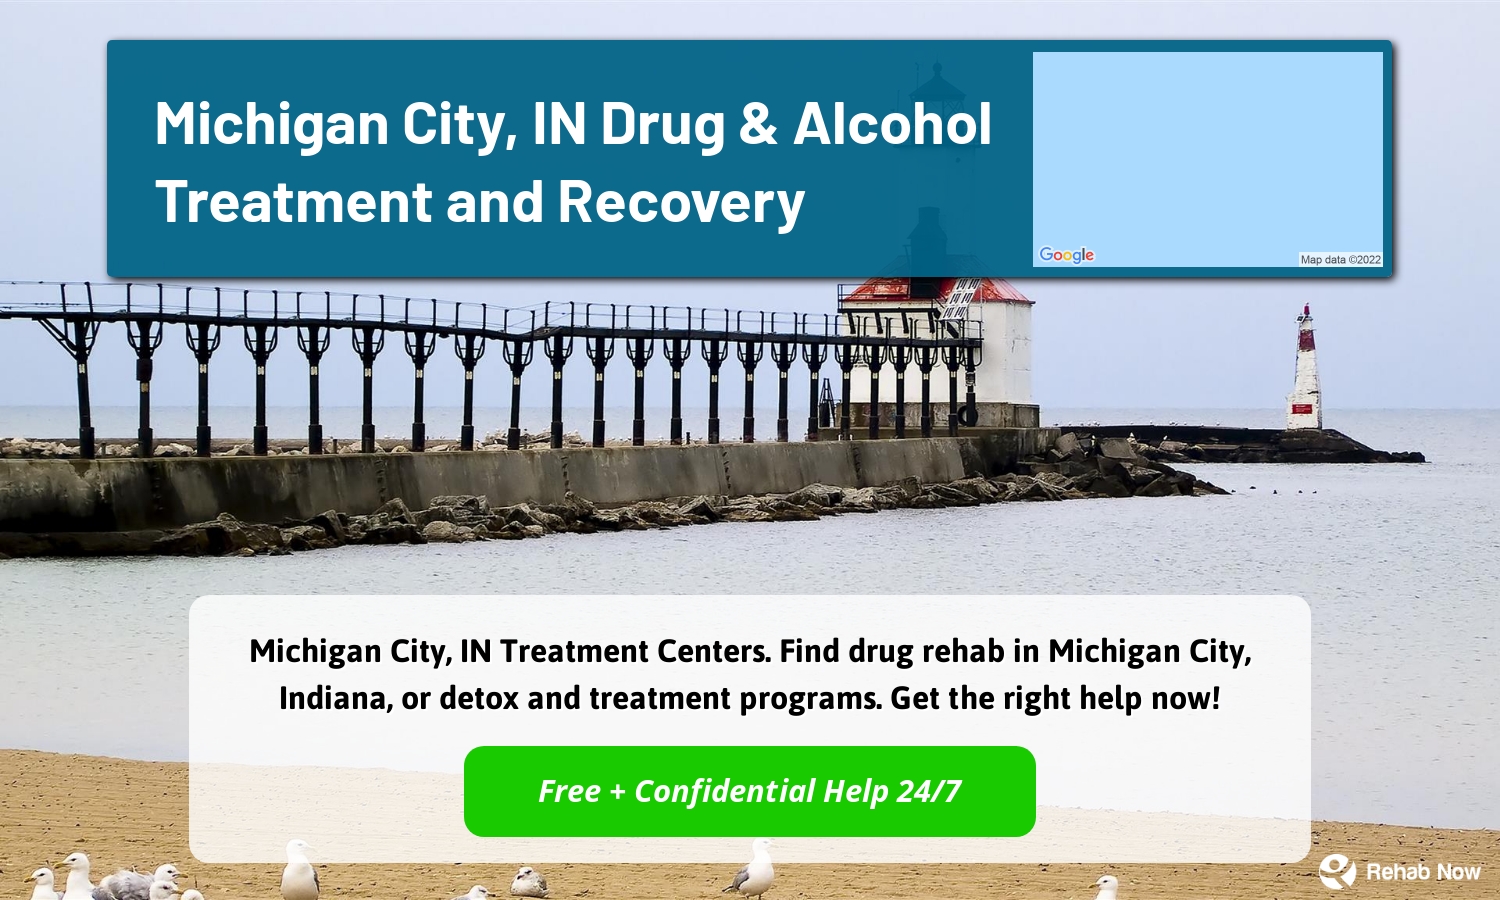 Michigan City, IN Treatment Centers. Find drug rehab in Michigan City, Indiana, or detox and treatment programs. Get the right help now!